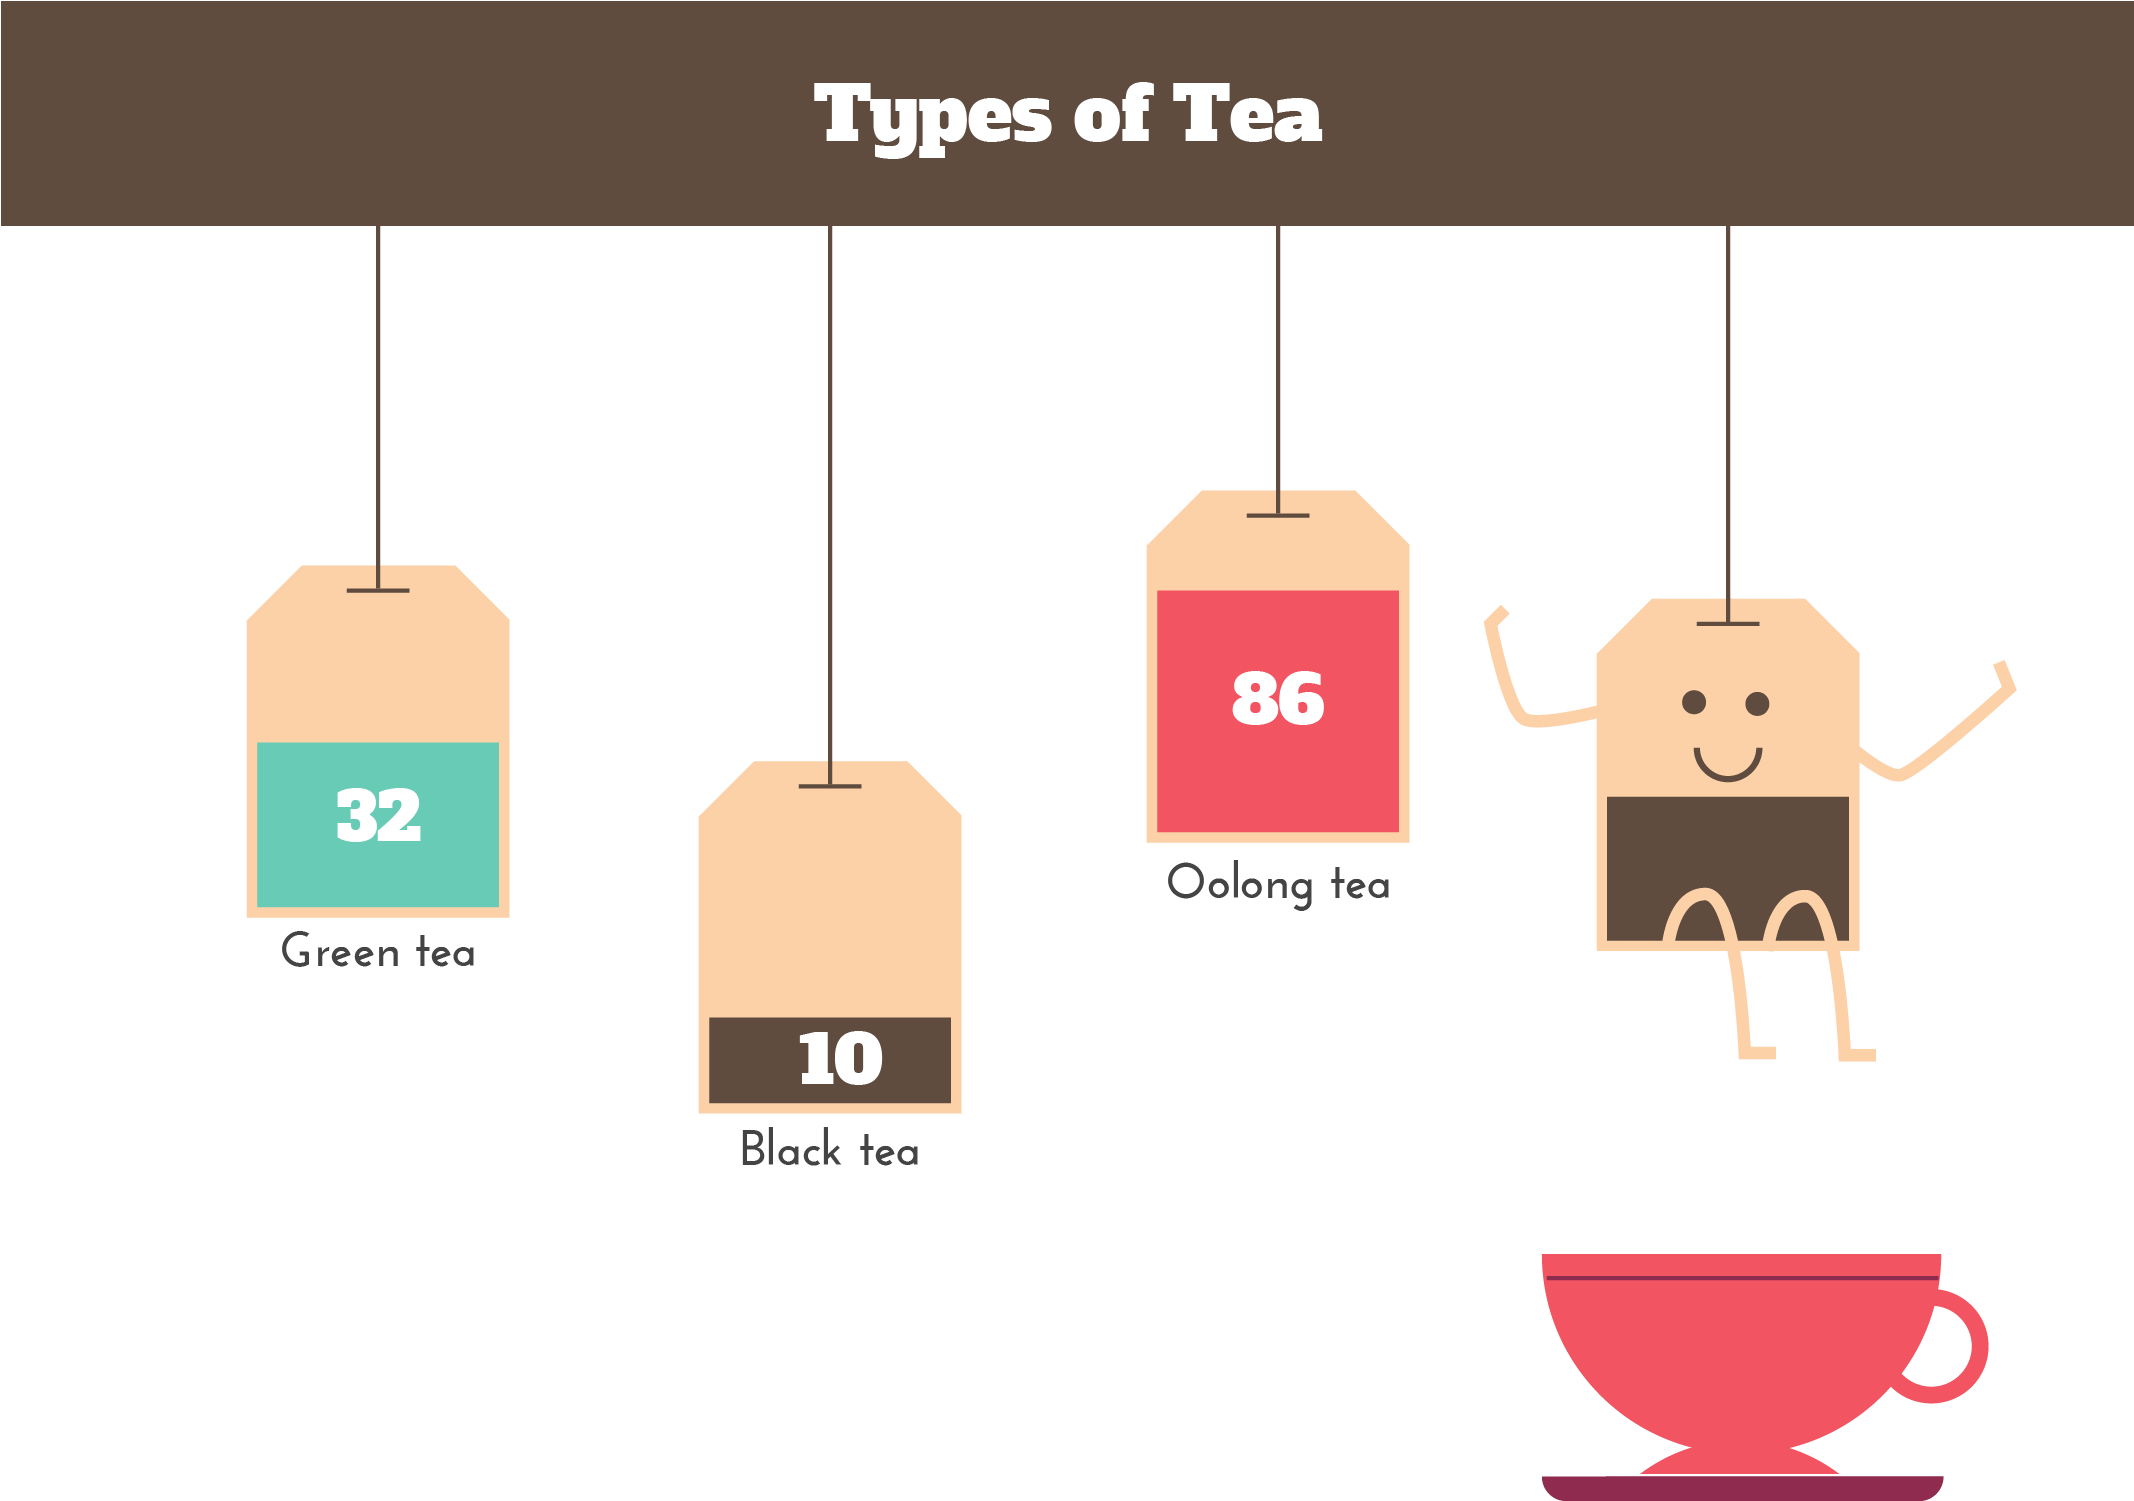 'tea Production' Is Represented By The Quantity Of - Tea Consumption By Type (2133x1600)